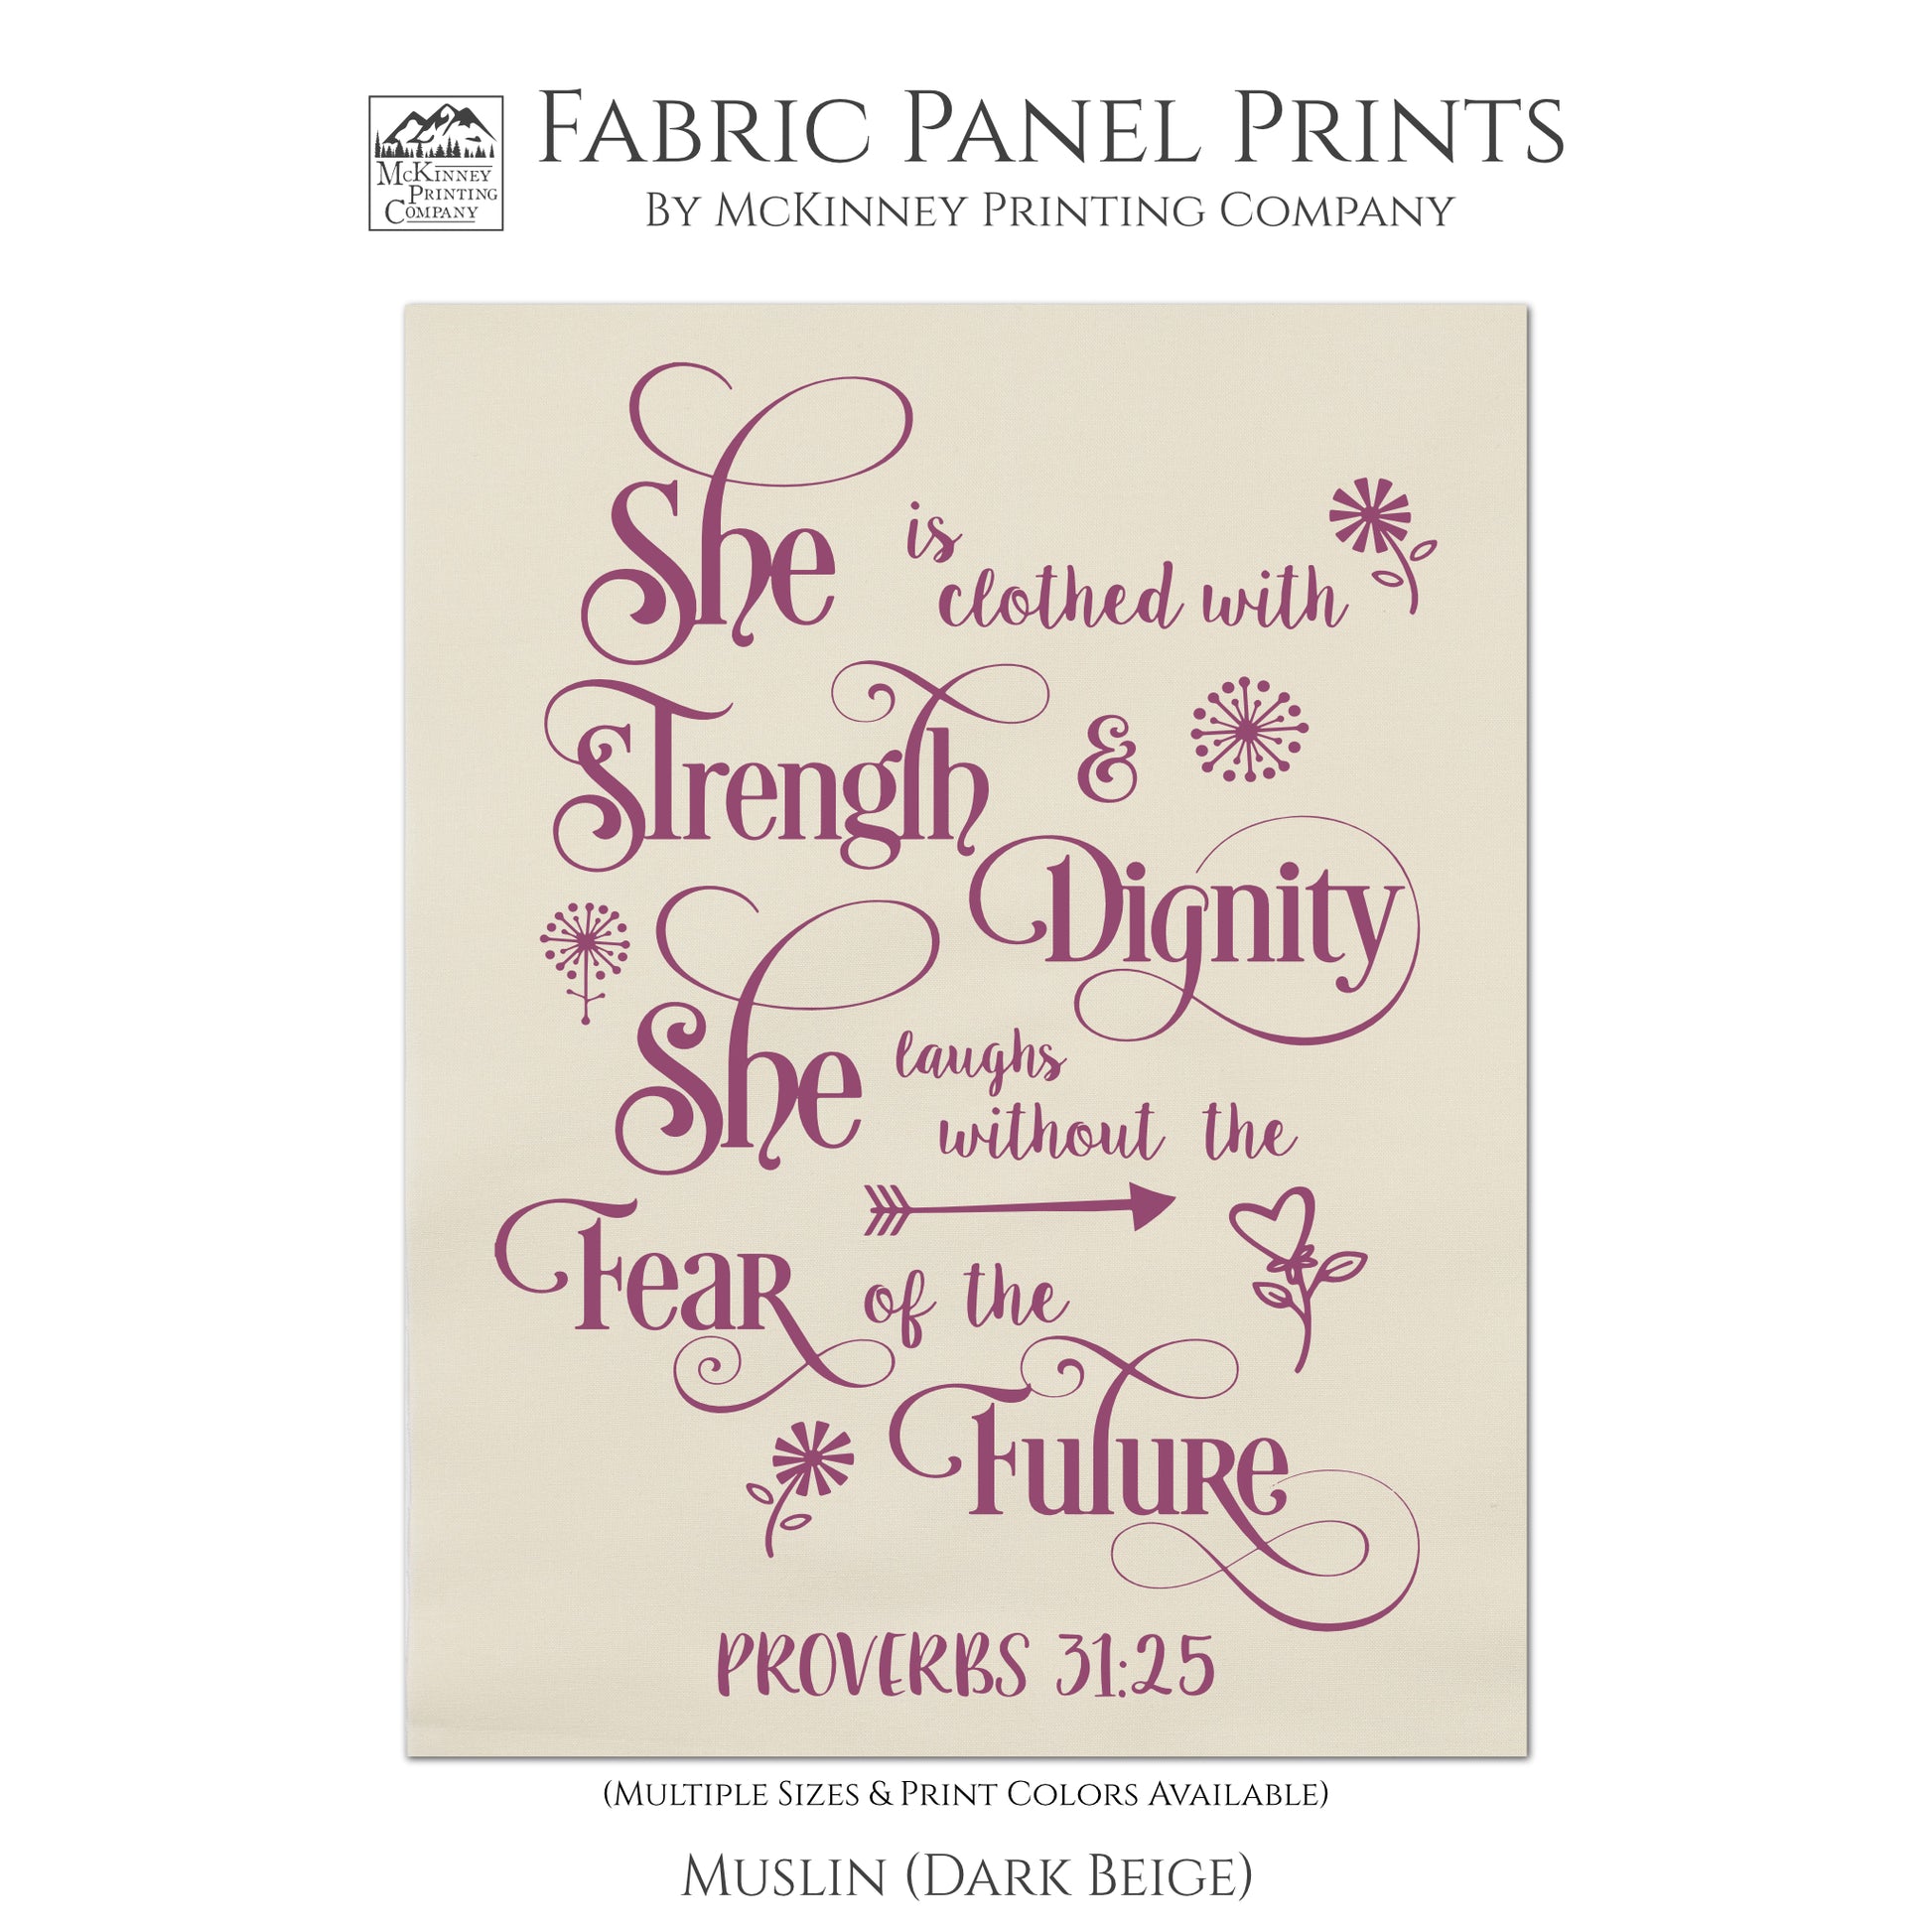 She is clothed with strength and dignity. She Laughs without the fear of the future - Proverbs 31:25 - Fabric Panel Print, Quilt Block, Religious, Scripture, Christian - Muslin